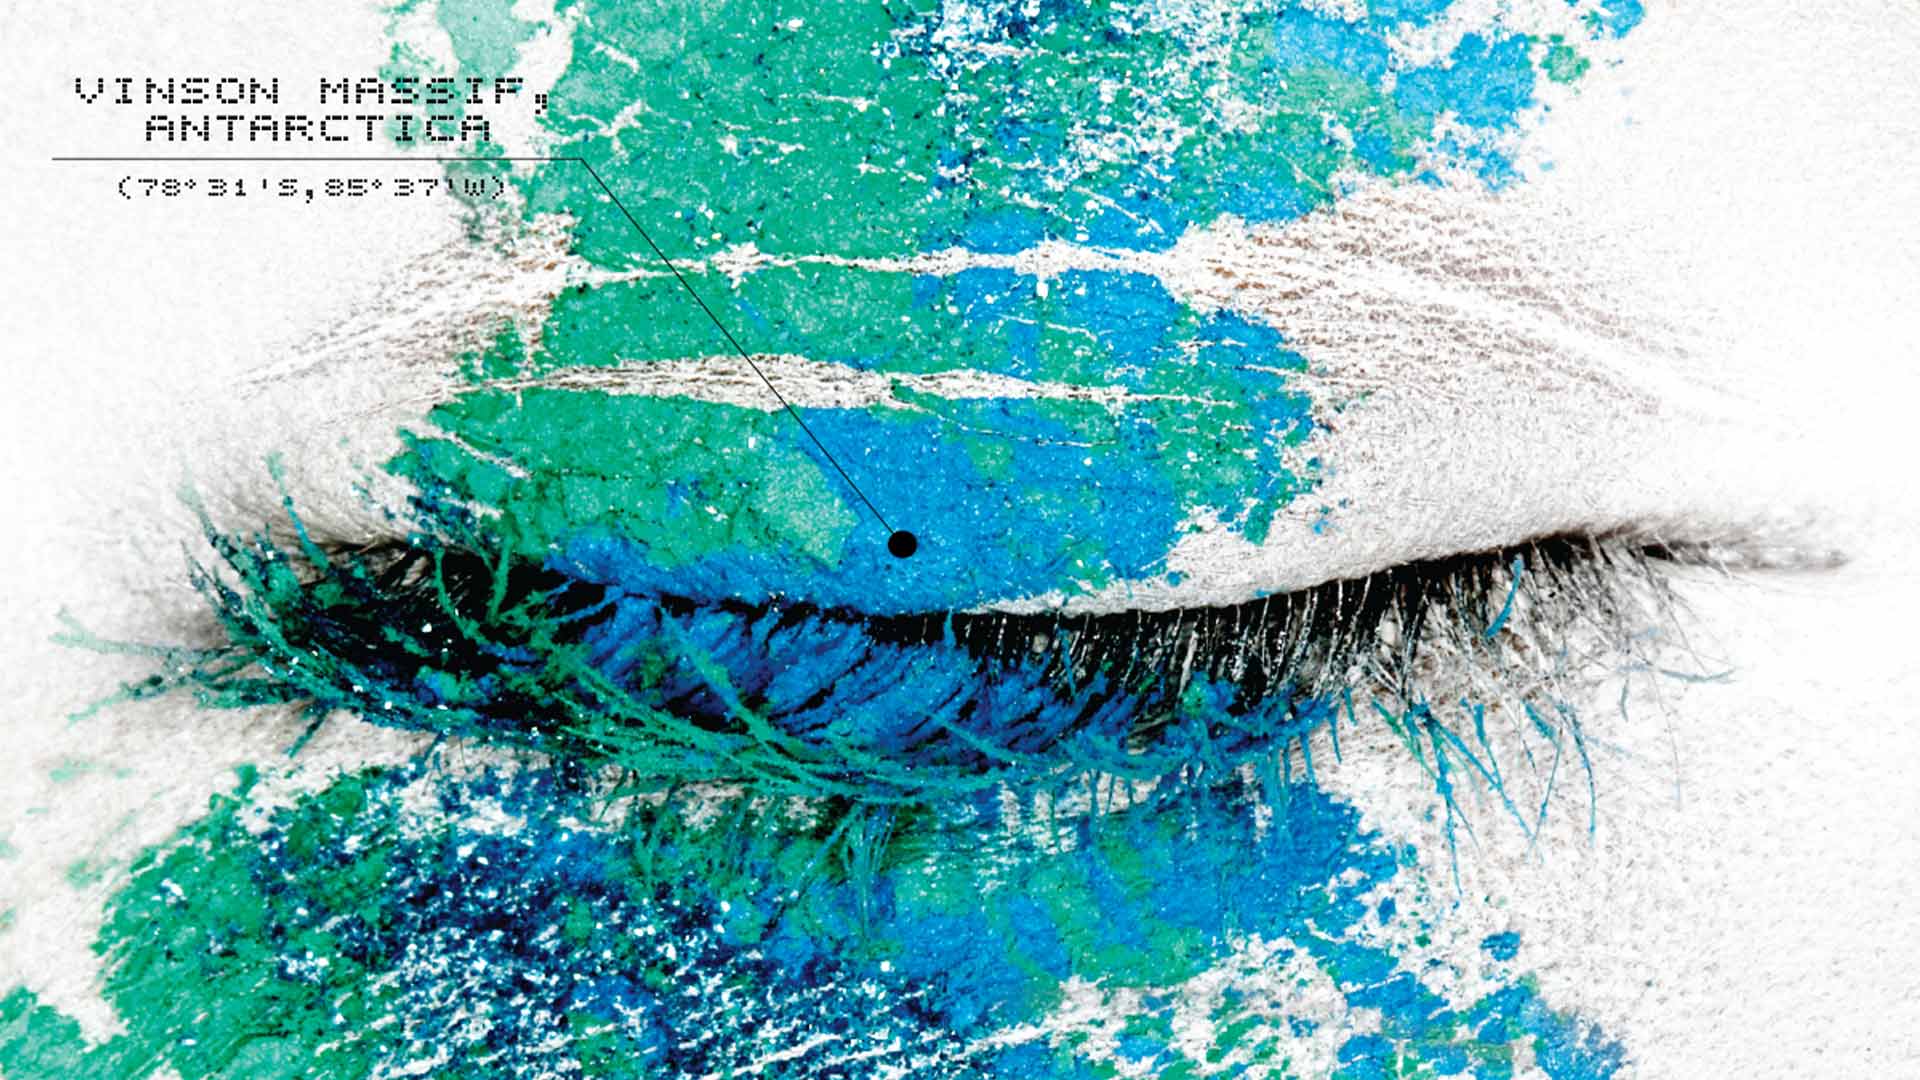 Close-up photographs of a model's eye with blue and green eyeshadow and colorful feather lips, juxtaposed with satellite imagery of Vinson Massif in Antarctica and the Straits of Magellan in South America, from the "Satellite of Love" beauty editorial in City Magazine, photographed by Thomas Rusch with makeup by Loni Baur and creative direction by Fabrice Frere of PlanetFab.